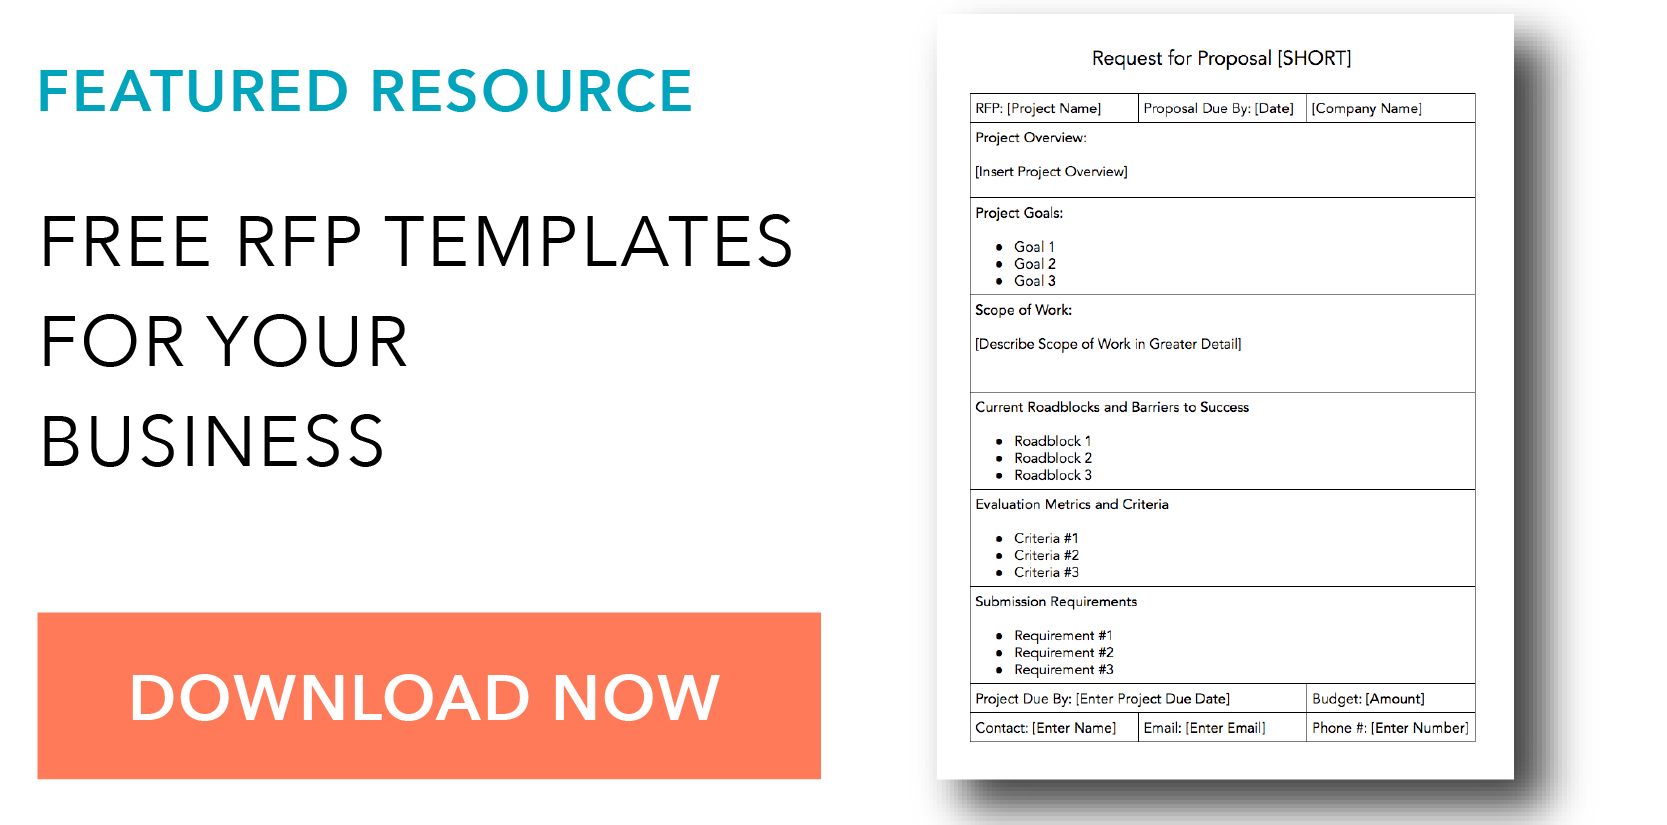 How To Write A Request For Proposal, With Template And Sample Intended For Post Event Evaluation Report Template